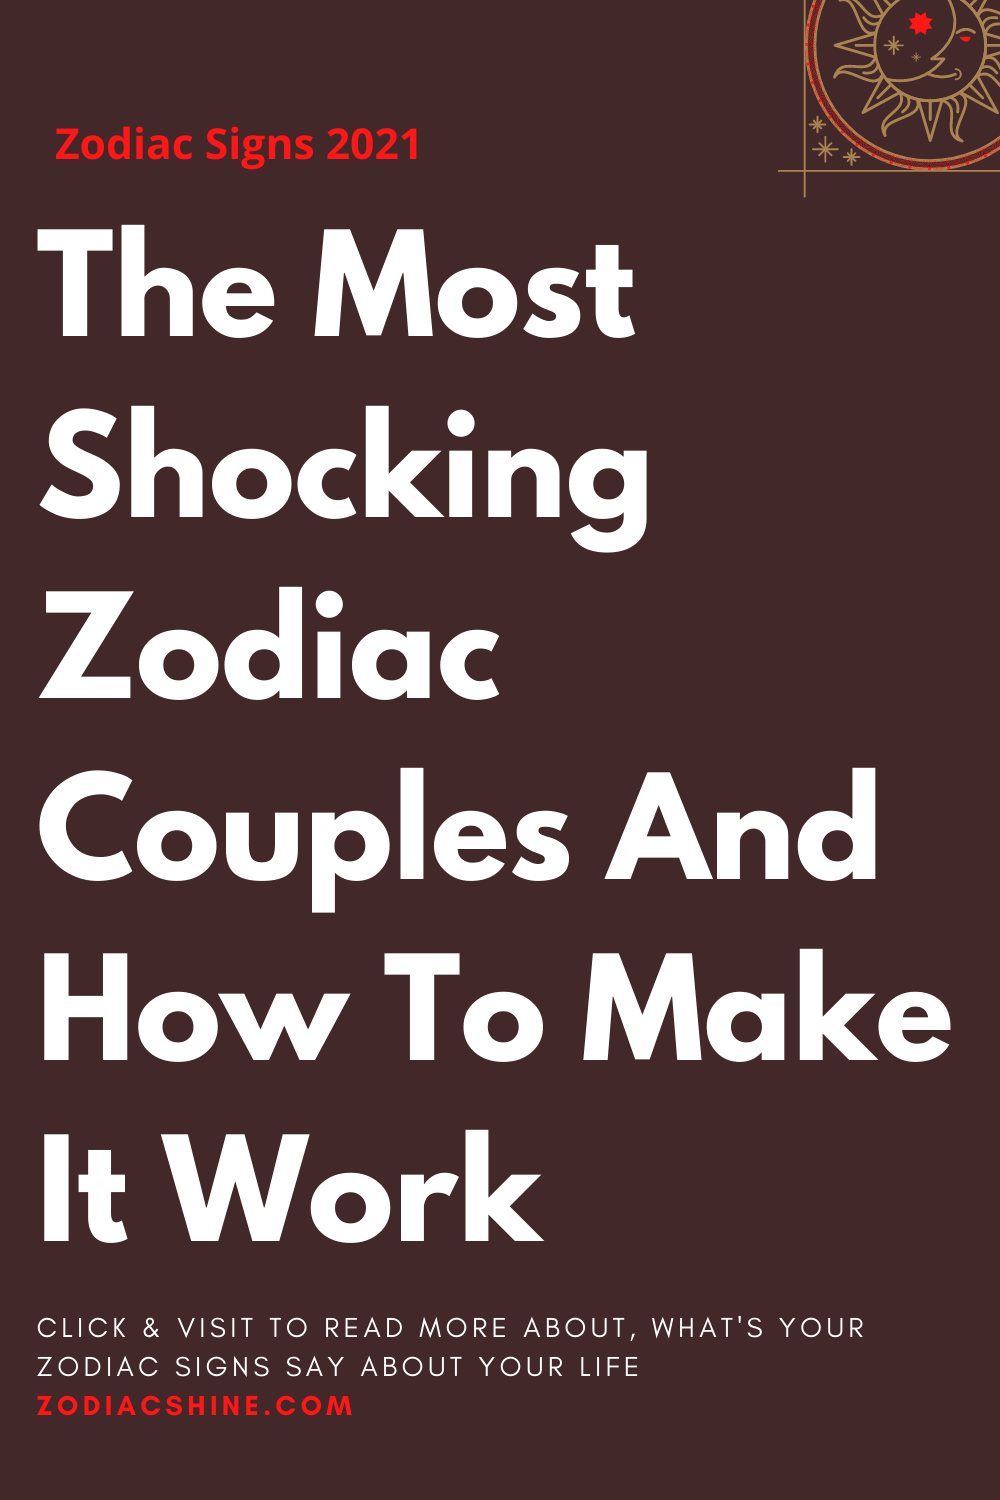 The Most Shocking Zodiac Couples And How To Make It Work